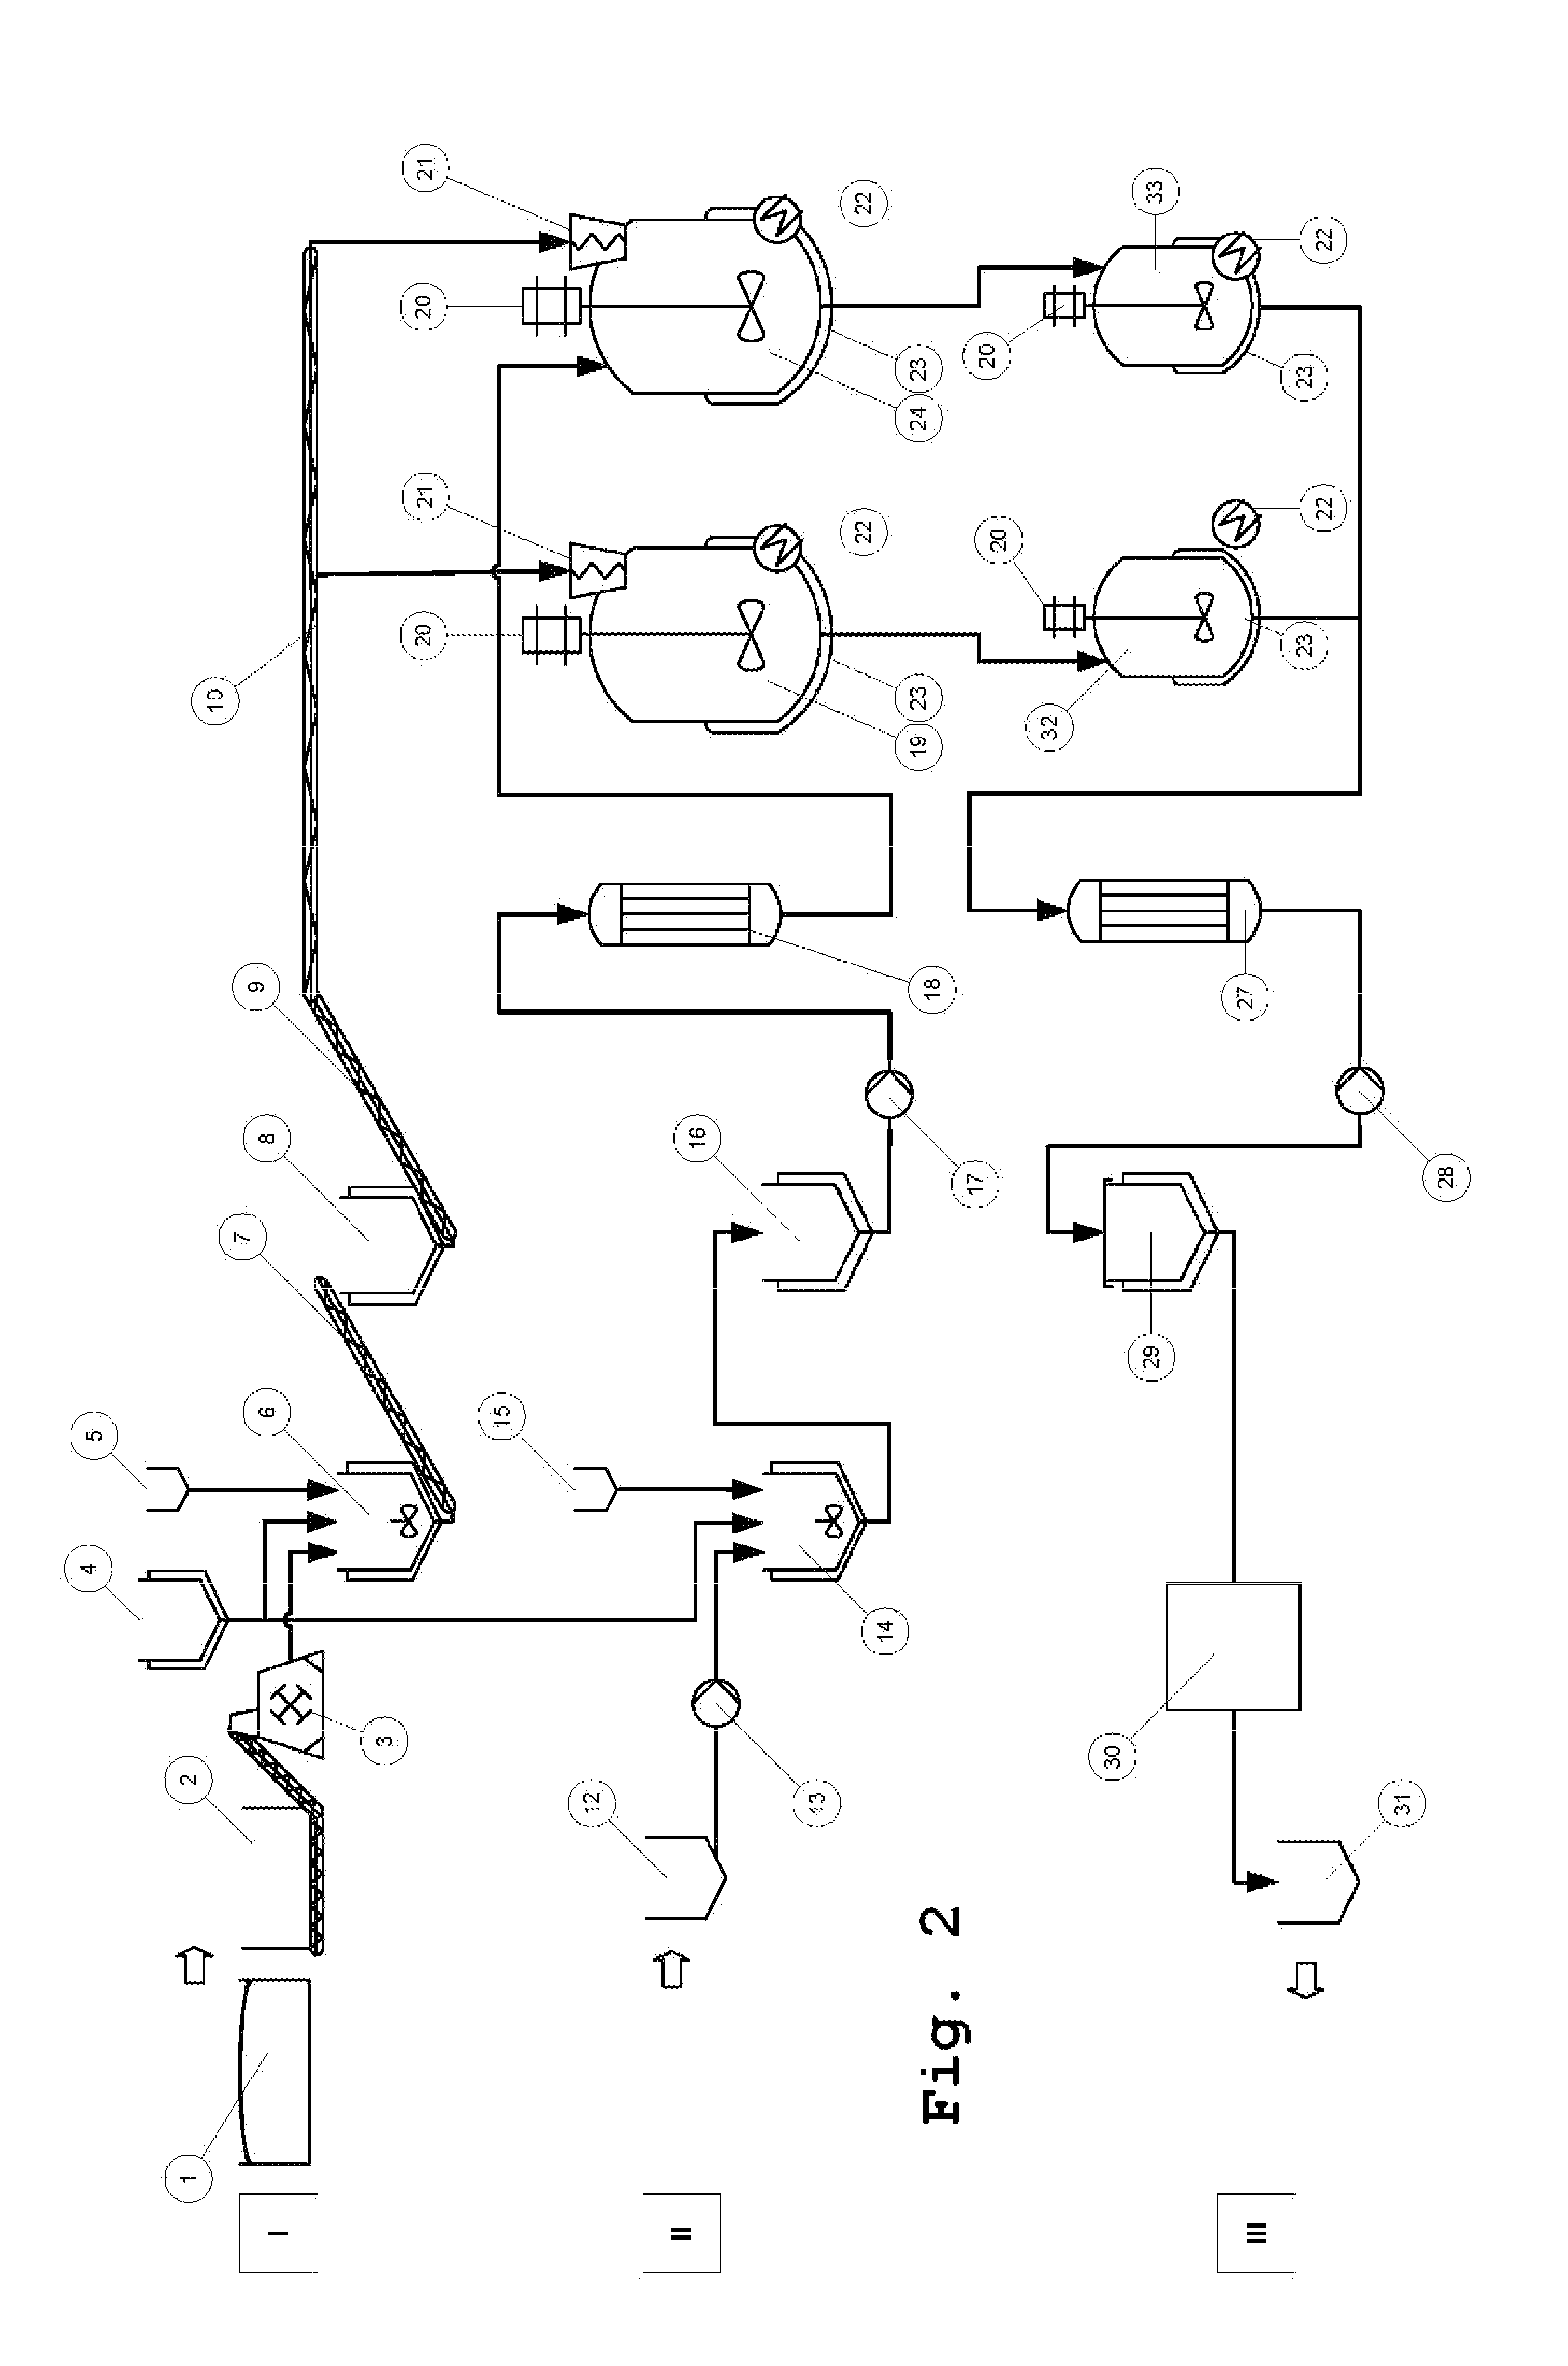 Method And Device For Producing Operating Materials Or Fuels